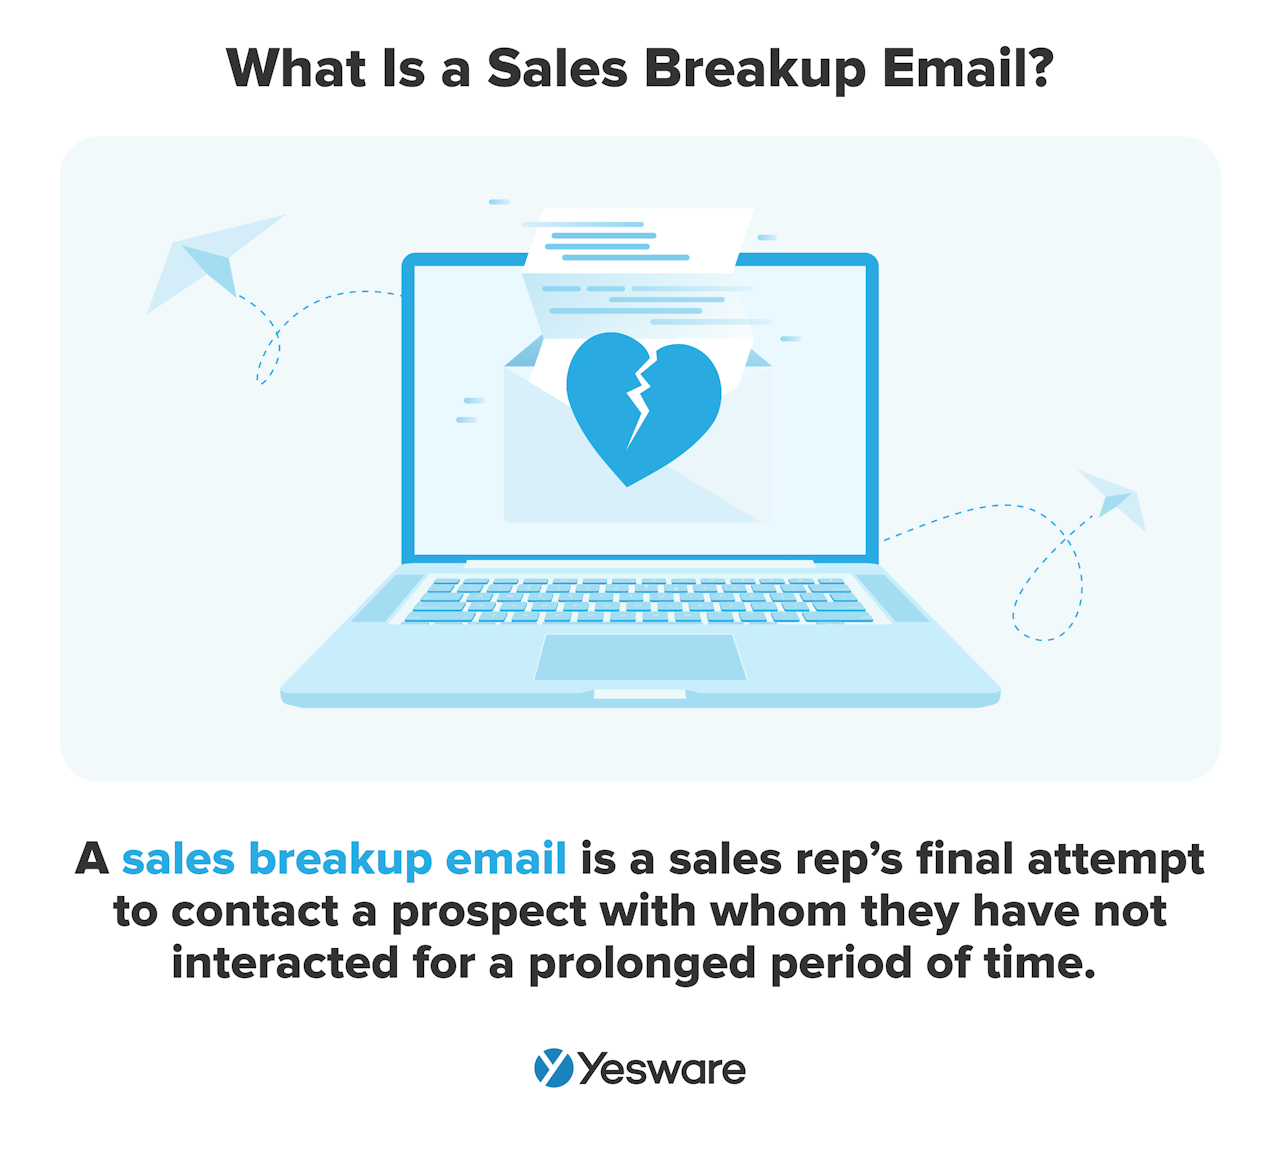 what is a sales breakup email?